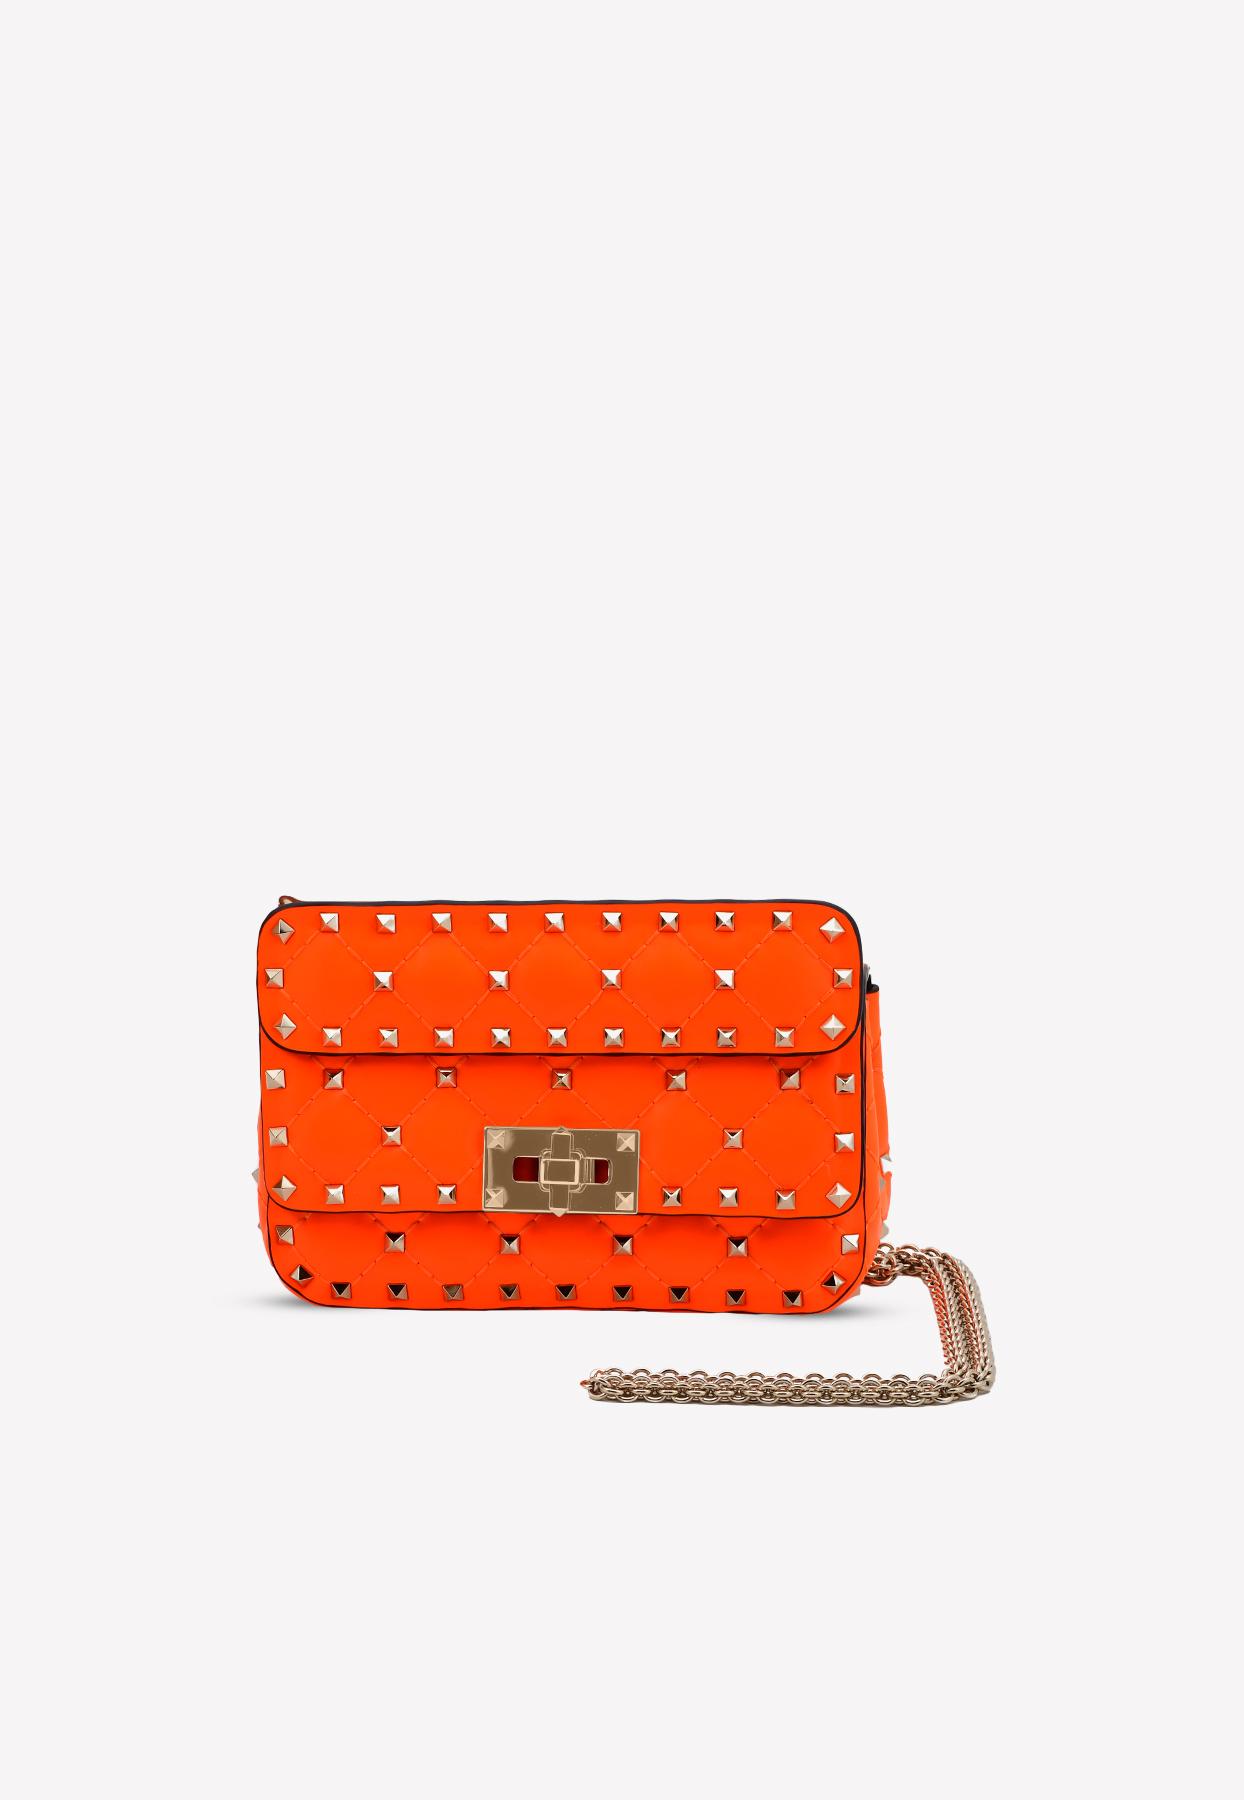 Valentino Leather Mini Rockstud Spike Fluo Calfskin Bag With Chain 